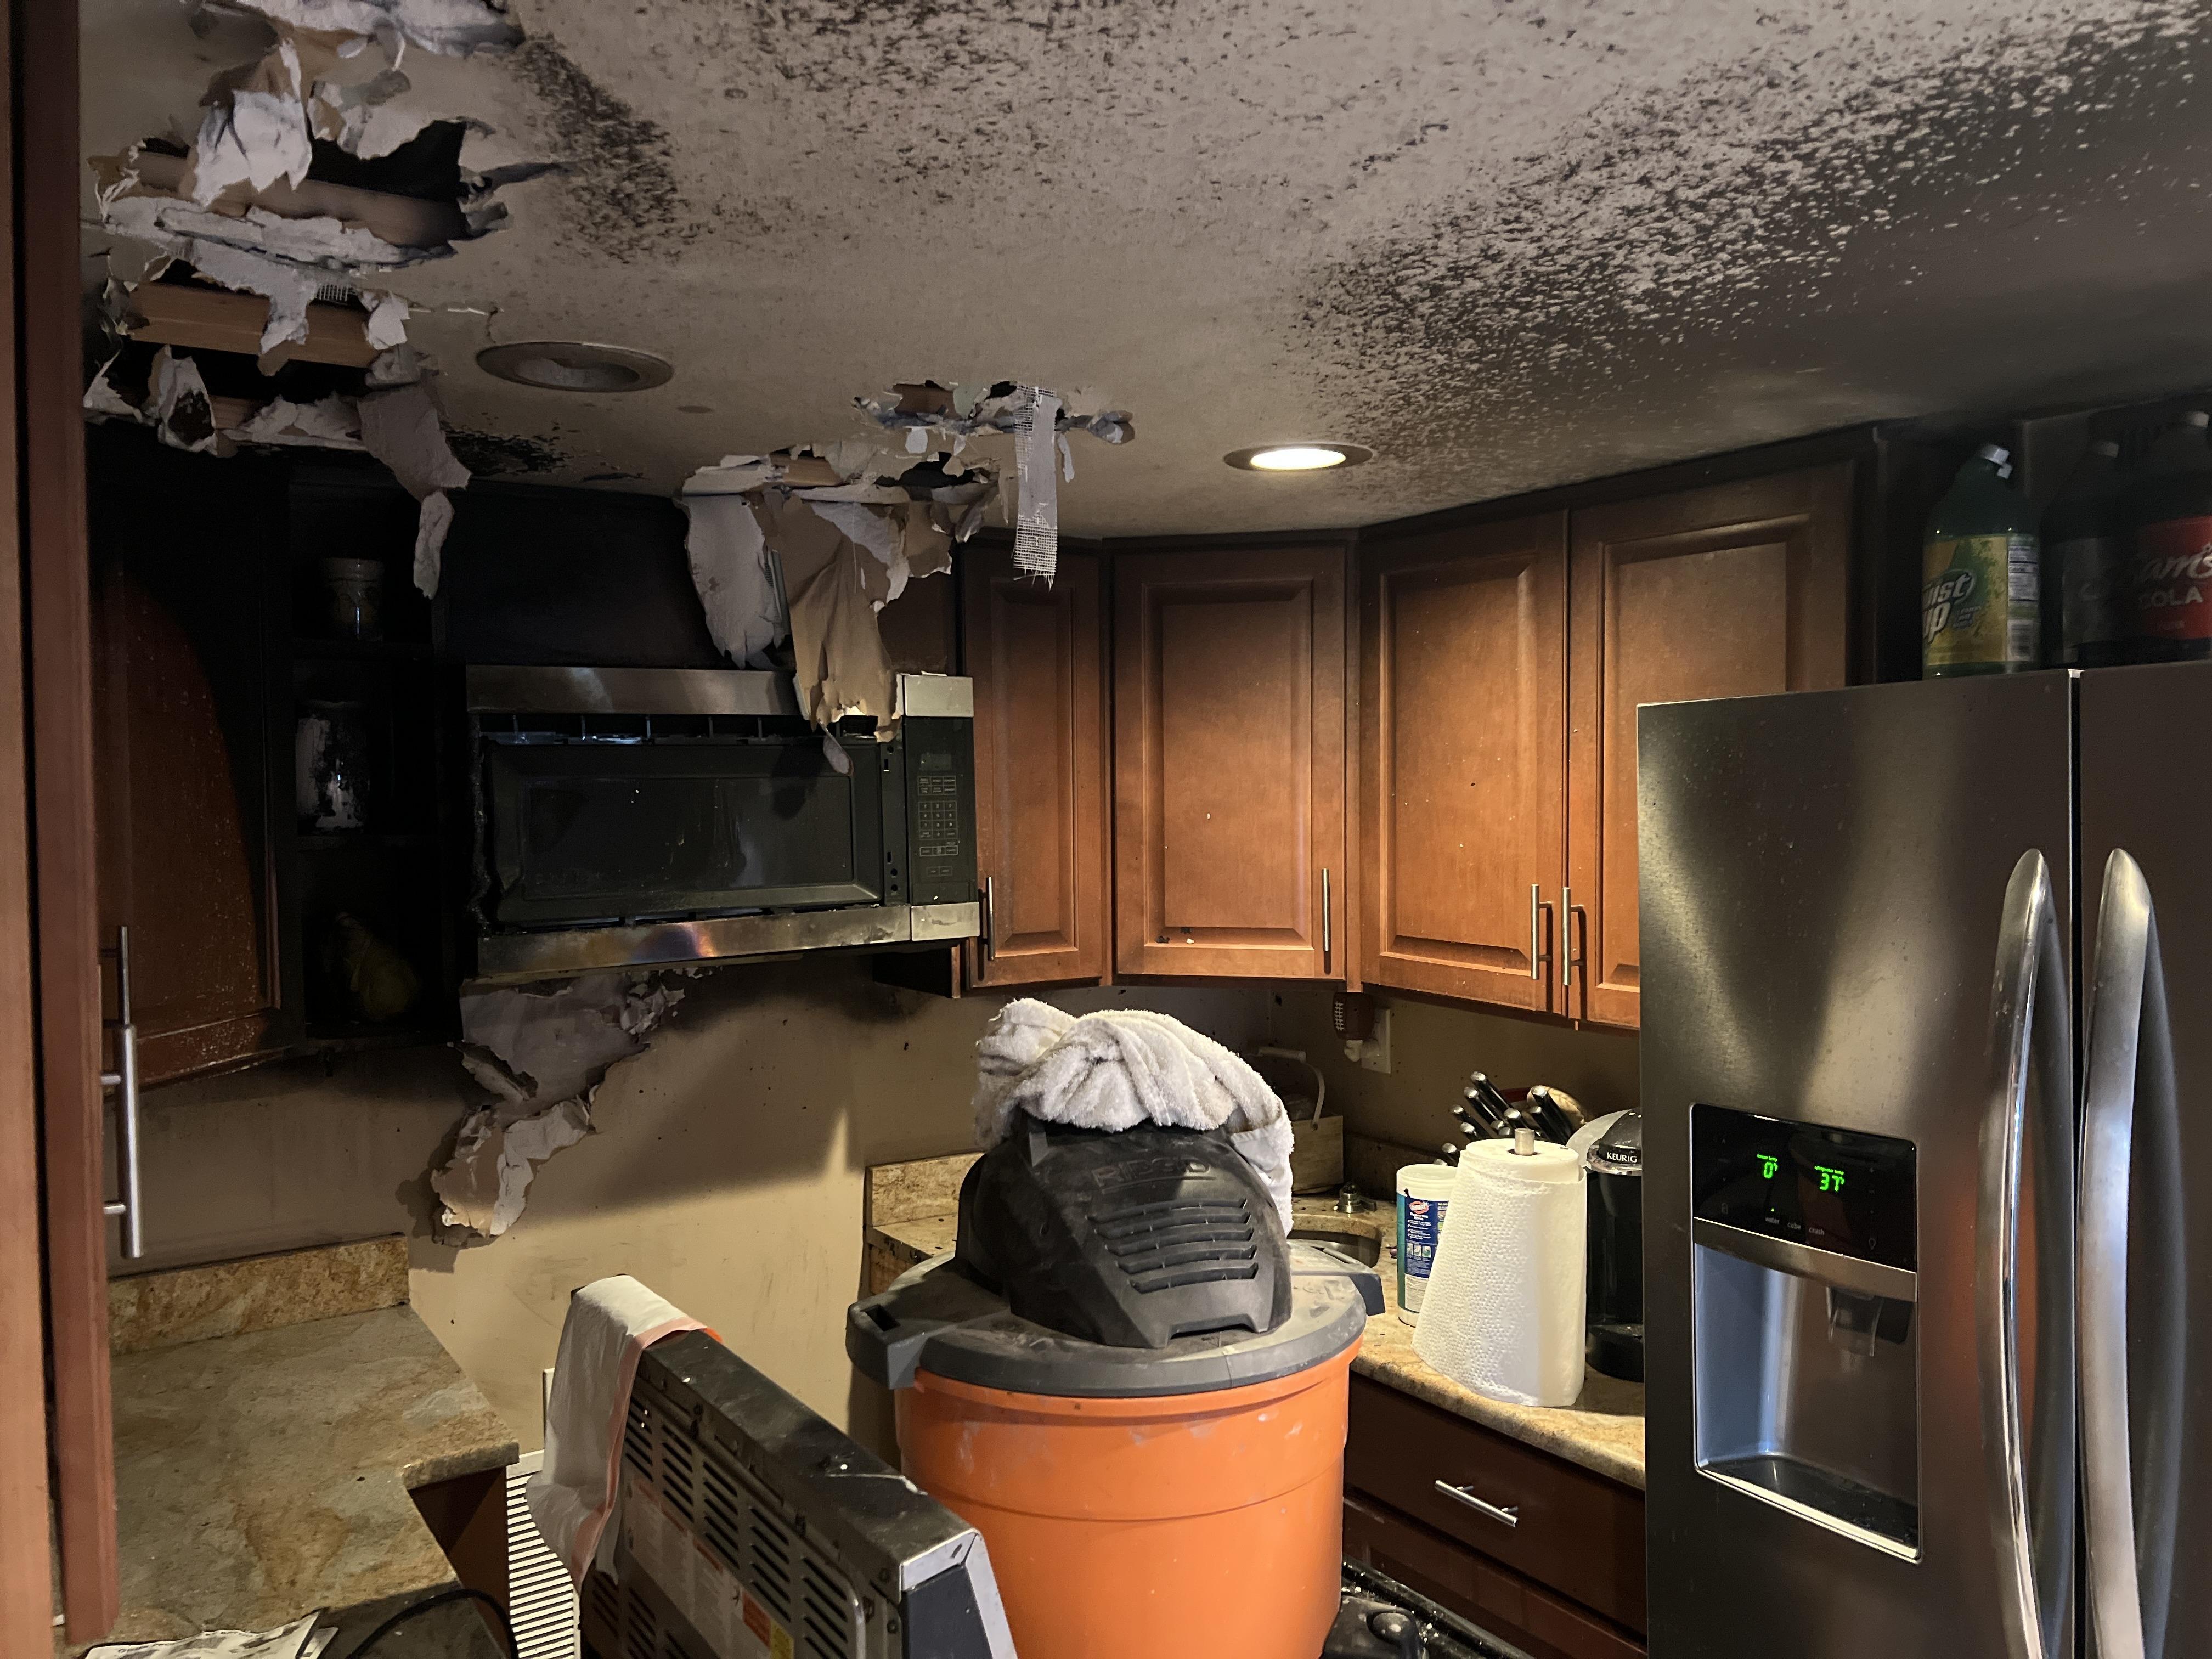 Soot Covered Walls in Kitchen